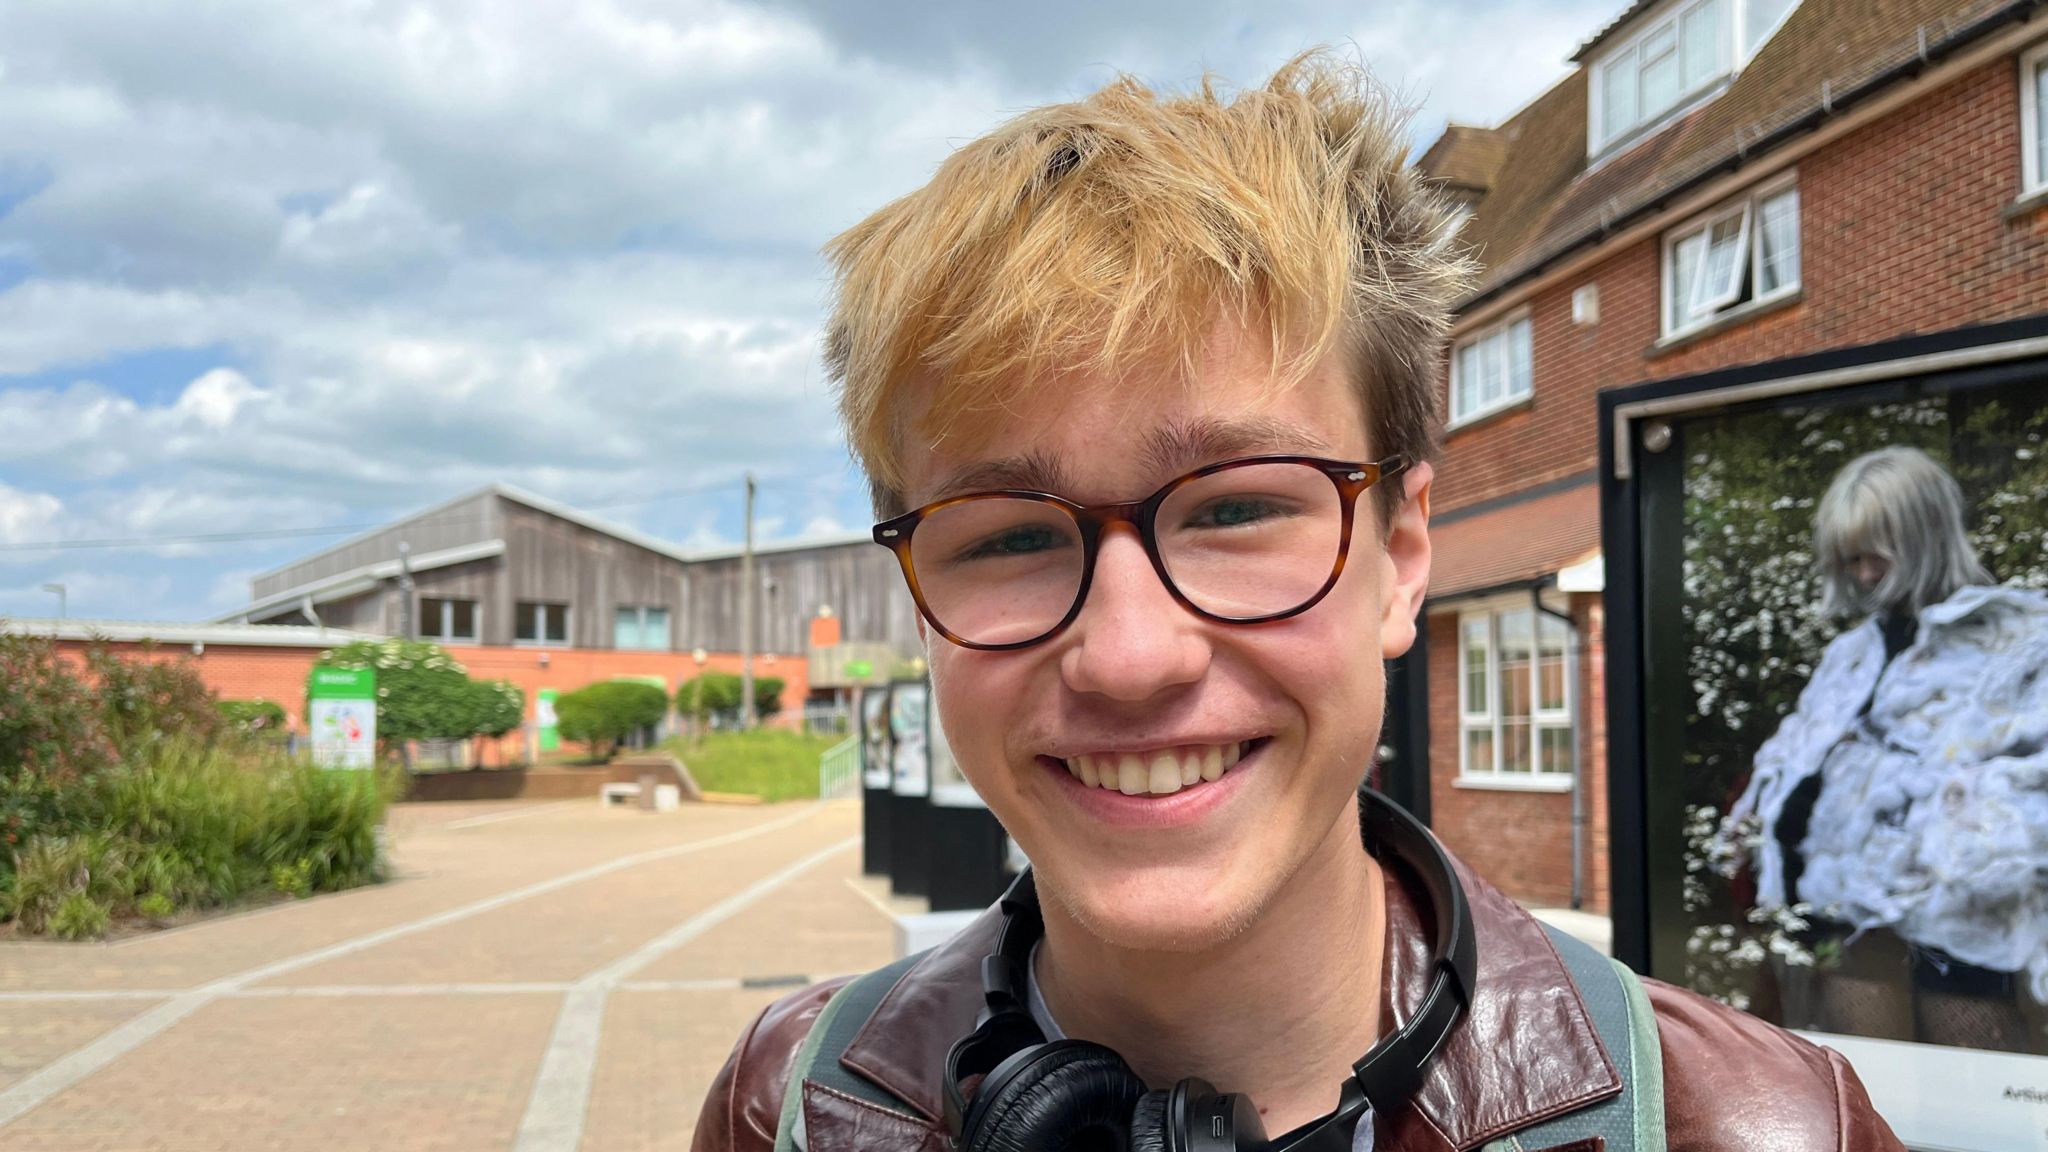 Oliver is 18. He has glasses and bleached blond hair. He's smiling wearing a t-shirt, leather jacket and headphones around this neck.